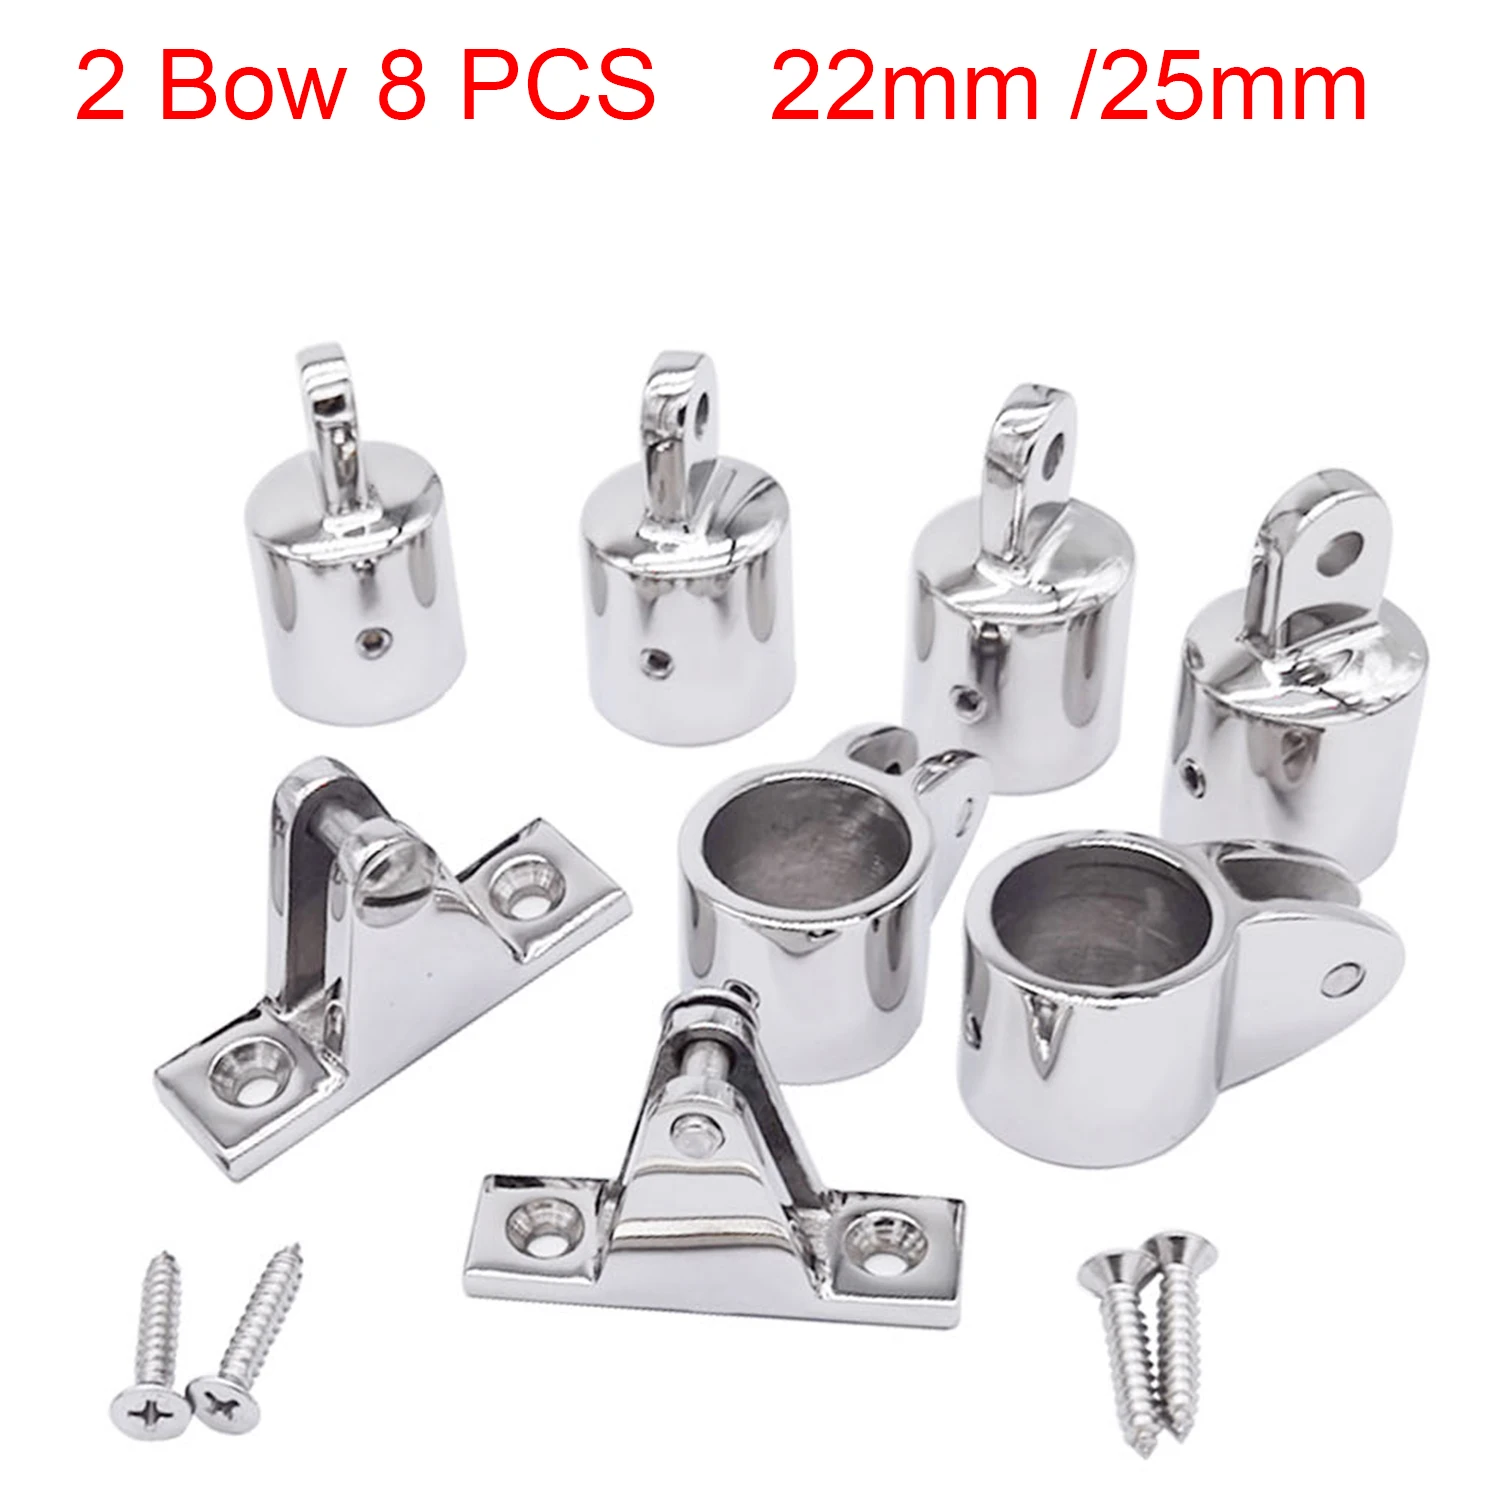 8 PCS Marine 316 Stainless Steel 2-Bow Bimini Top Hardware Fitting Set Deck Hinge Jaw Slide Eye End Fitting for 22/25mm Pipe 2pcs lot stainless steel 316 heavy duty 360 degrees swivel quick release boat bimini top deck hinge marine hardware accessories